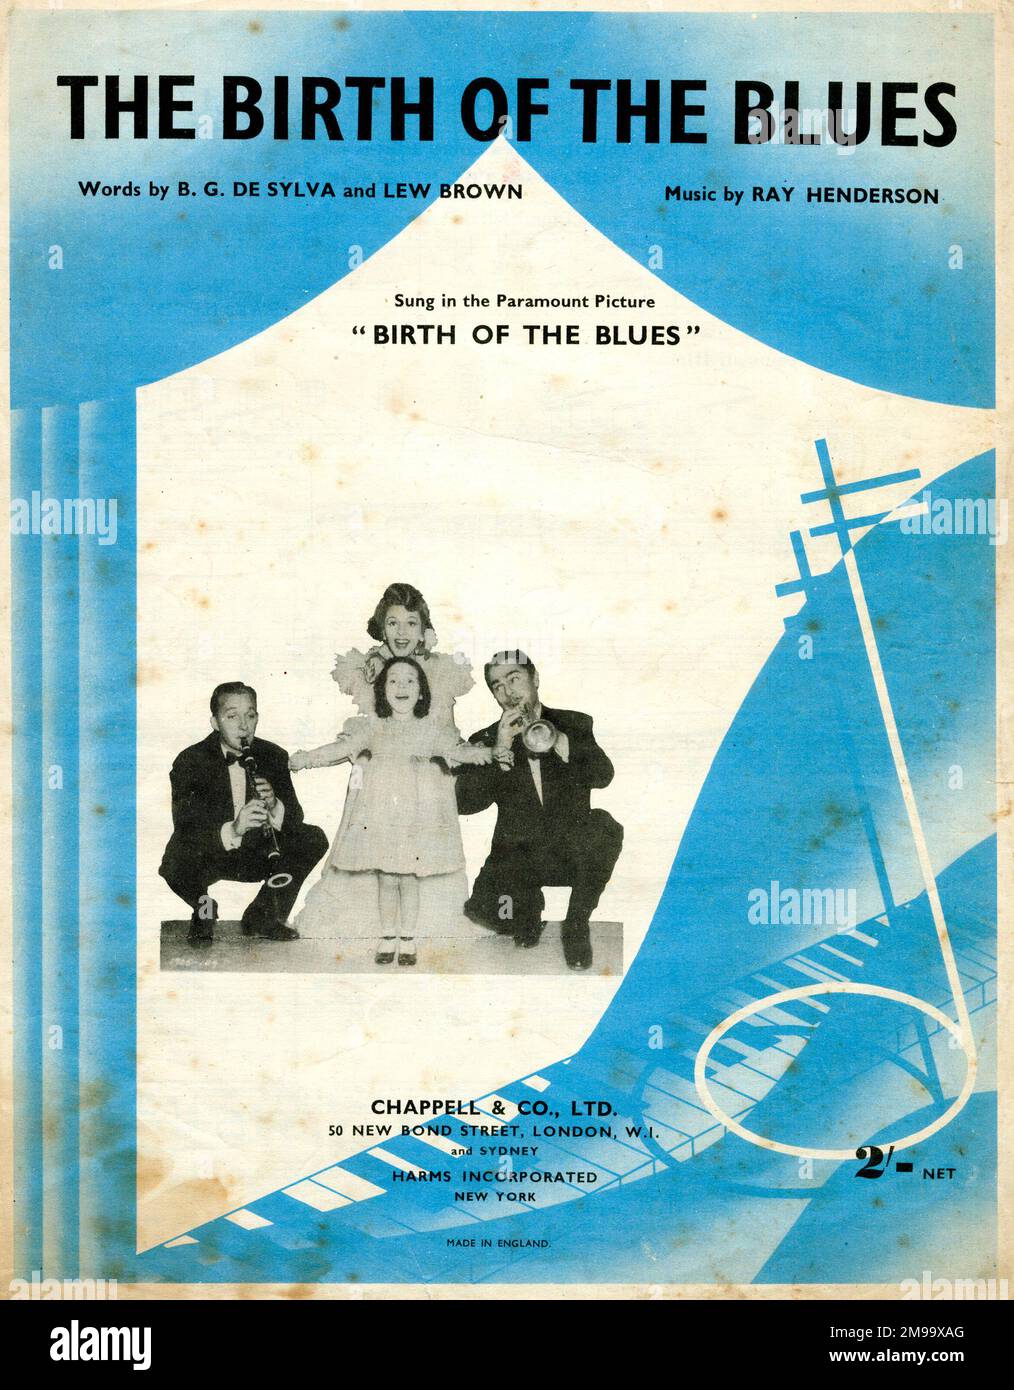 Music cover, The Birth of the Blues, words by B G De Sylva and Lew Brown, music by Ray Henderson. Stock Photo